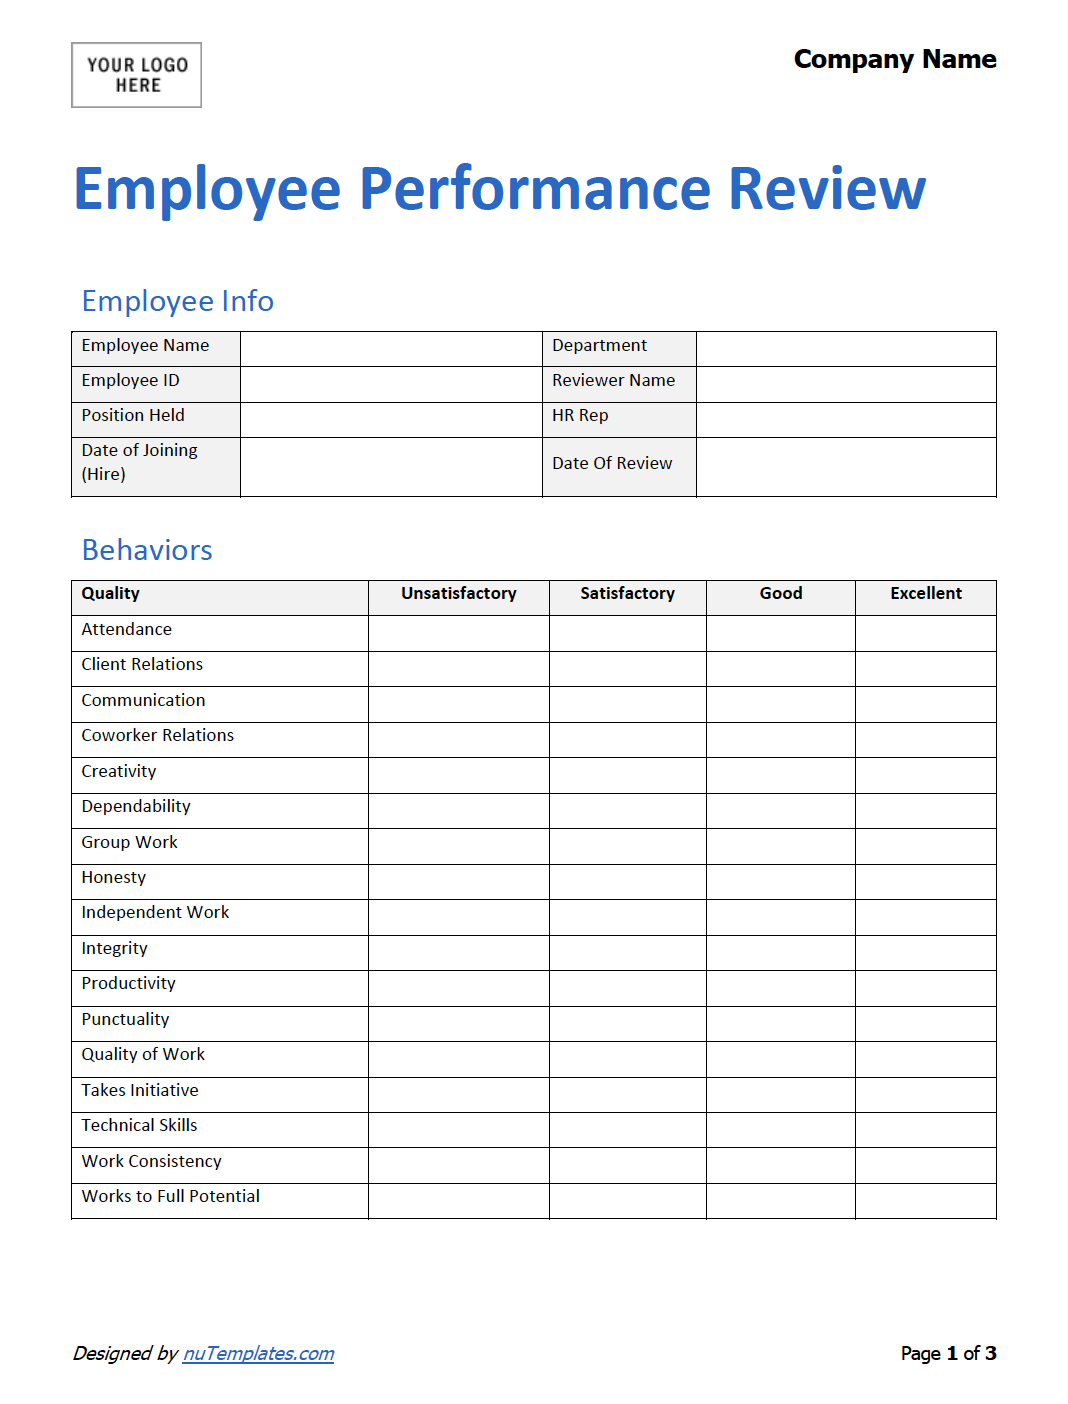 free-printable-employee-review-template-printable-forms-free-online